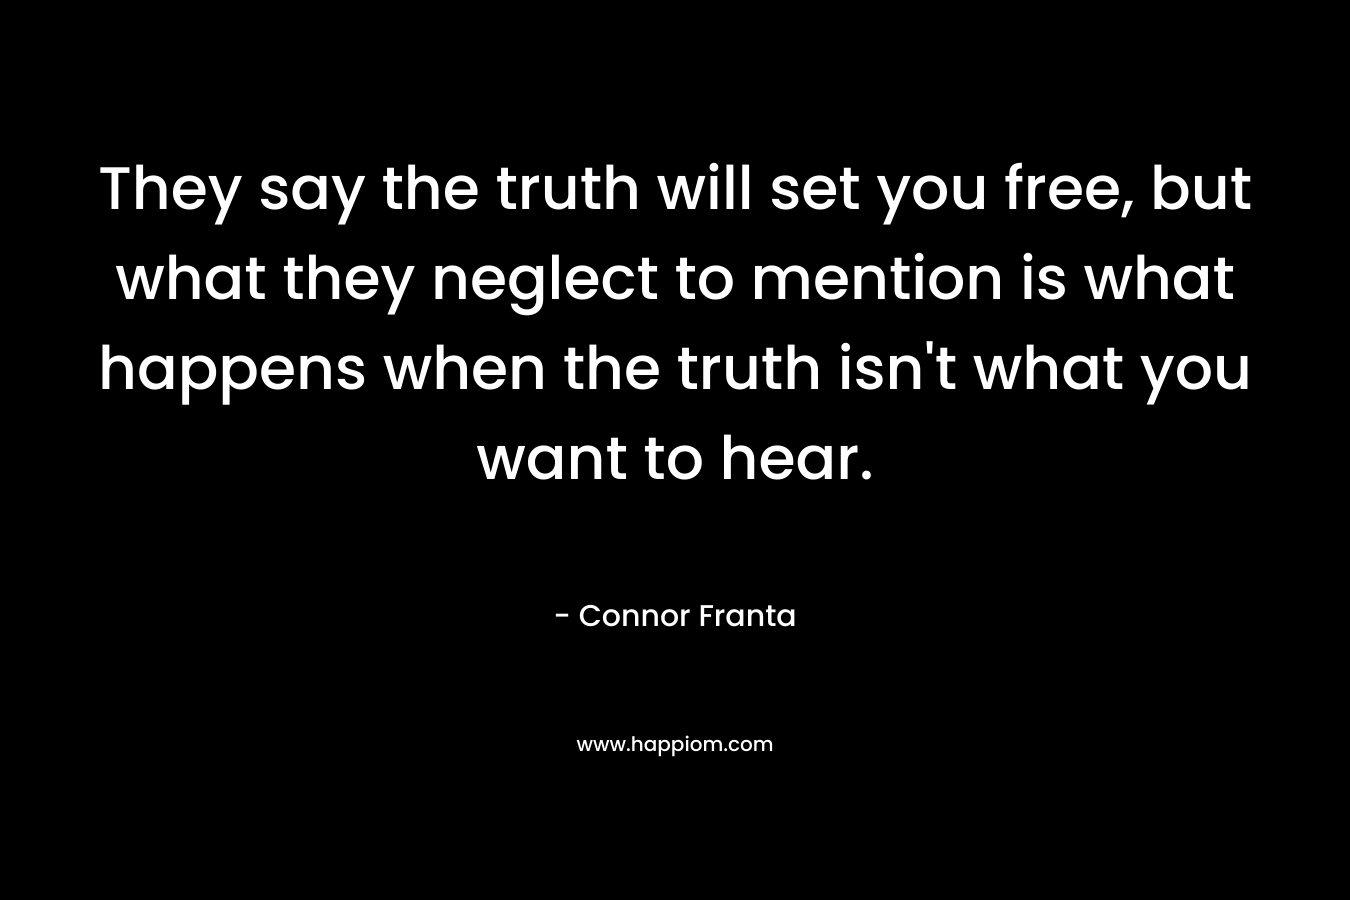 They say the truth will set you free, but what they neglect to mention is what happens when the truth isn't what you want to hear.